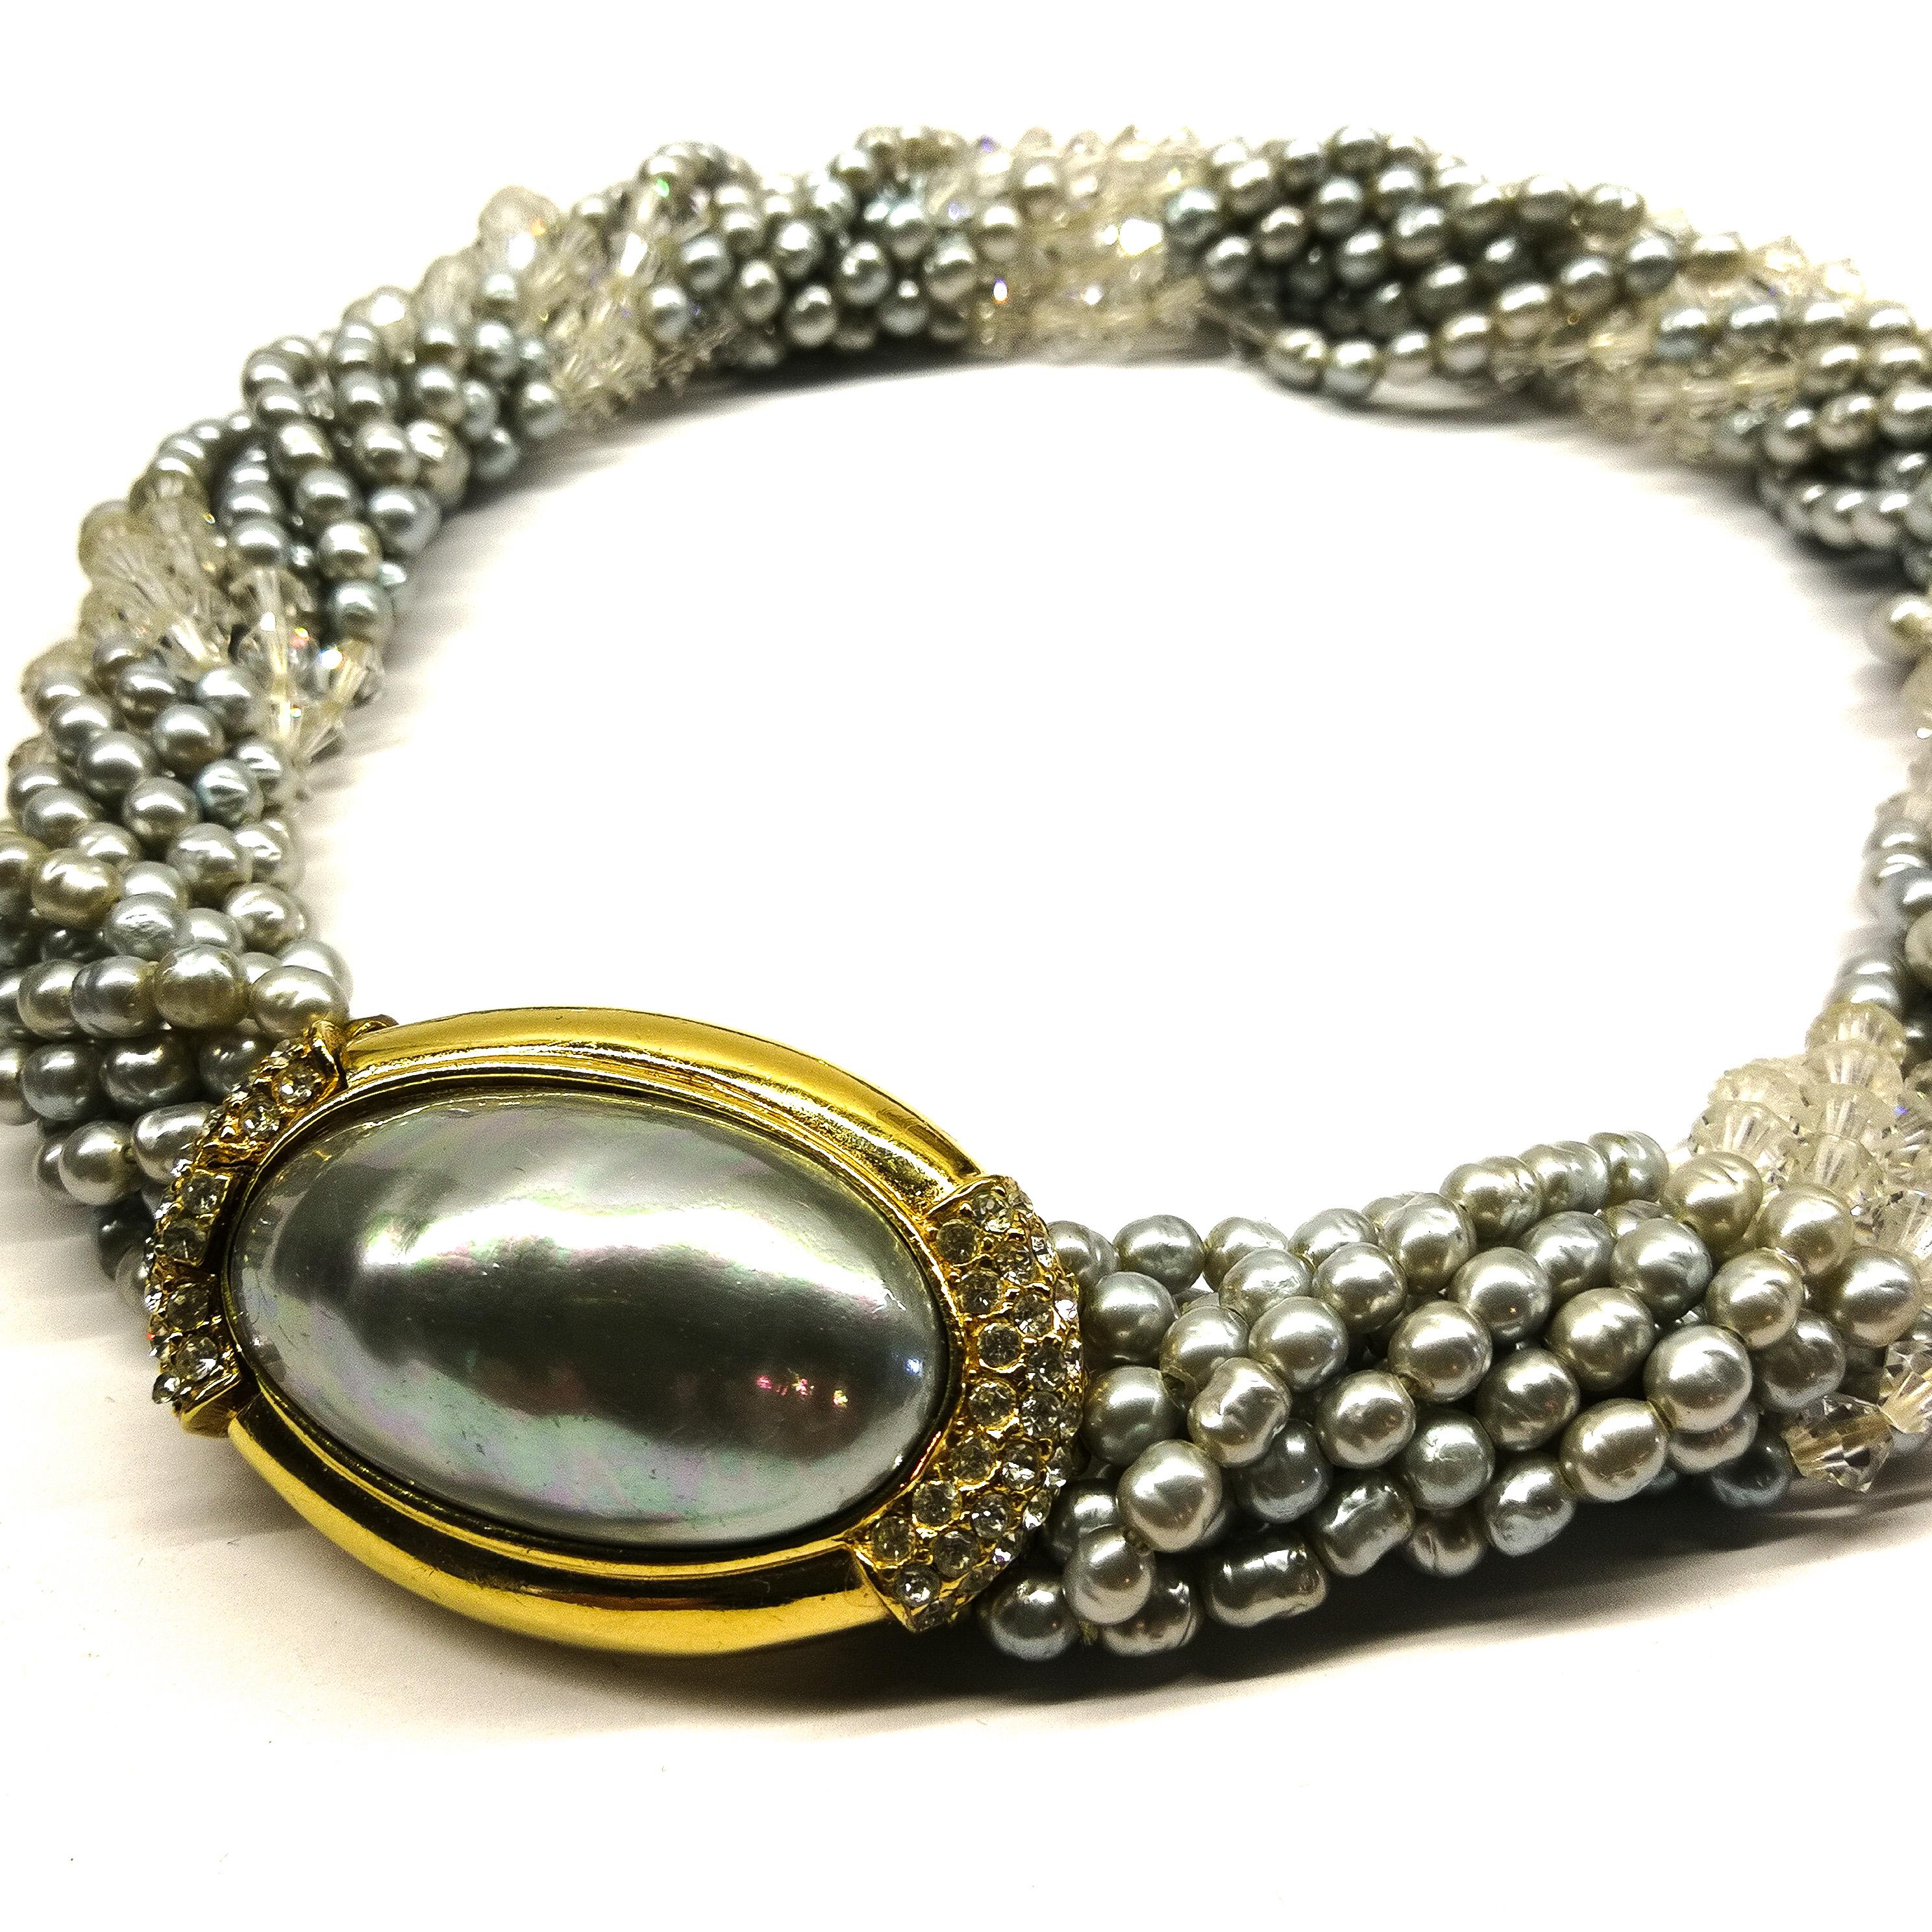 A very elegant necklace, made from soft grey baroque paste pearls and faceted crystals, in a 'twist', meeting in a large gilt and paste clasp, with Mabe style soft grey paste pearl at its centre. Made by Ciner, always a name for the highest quality